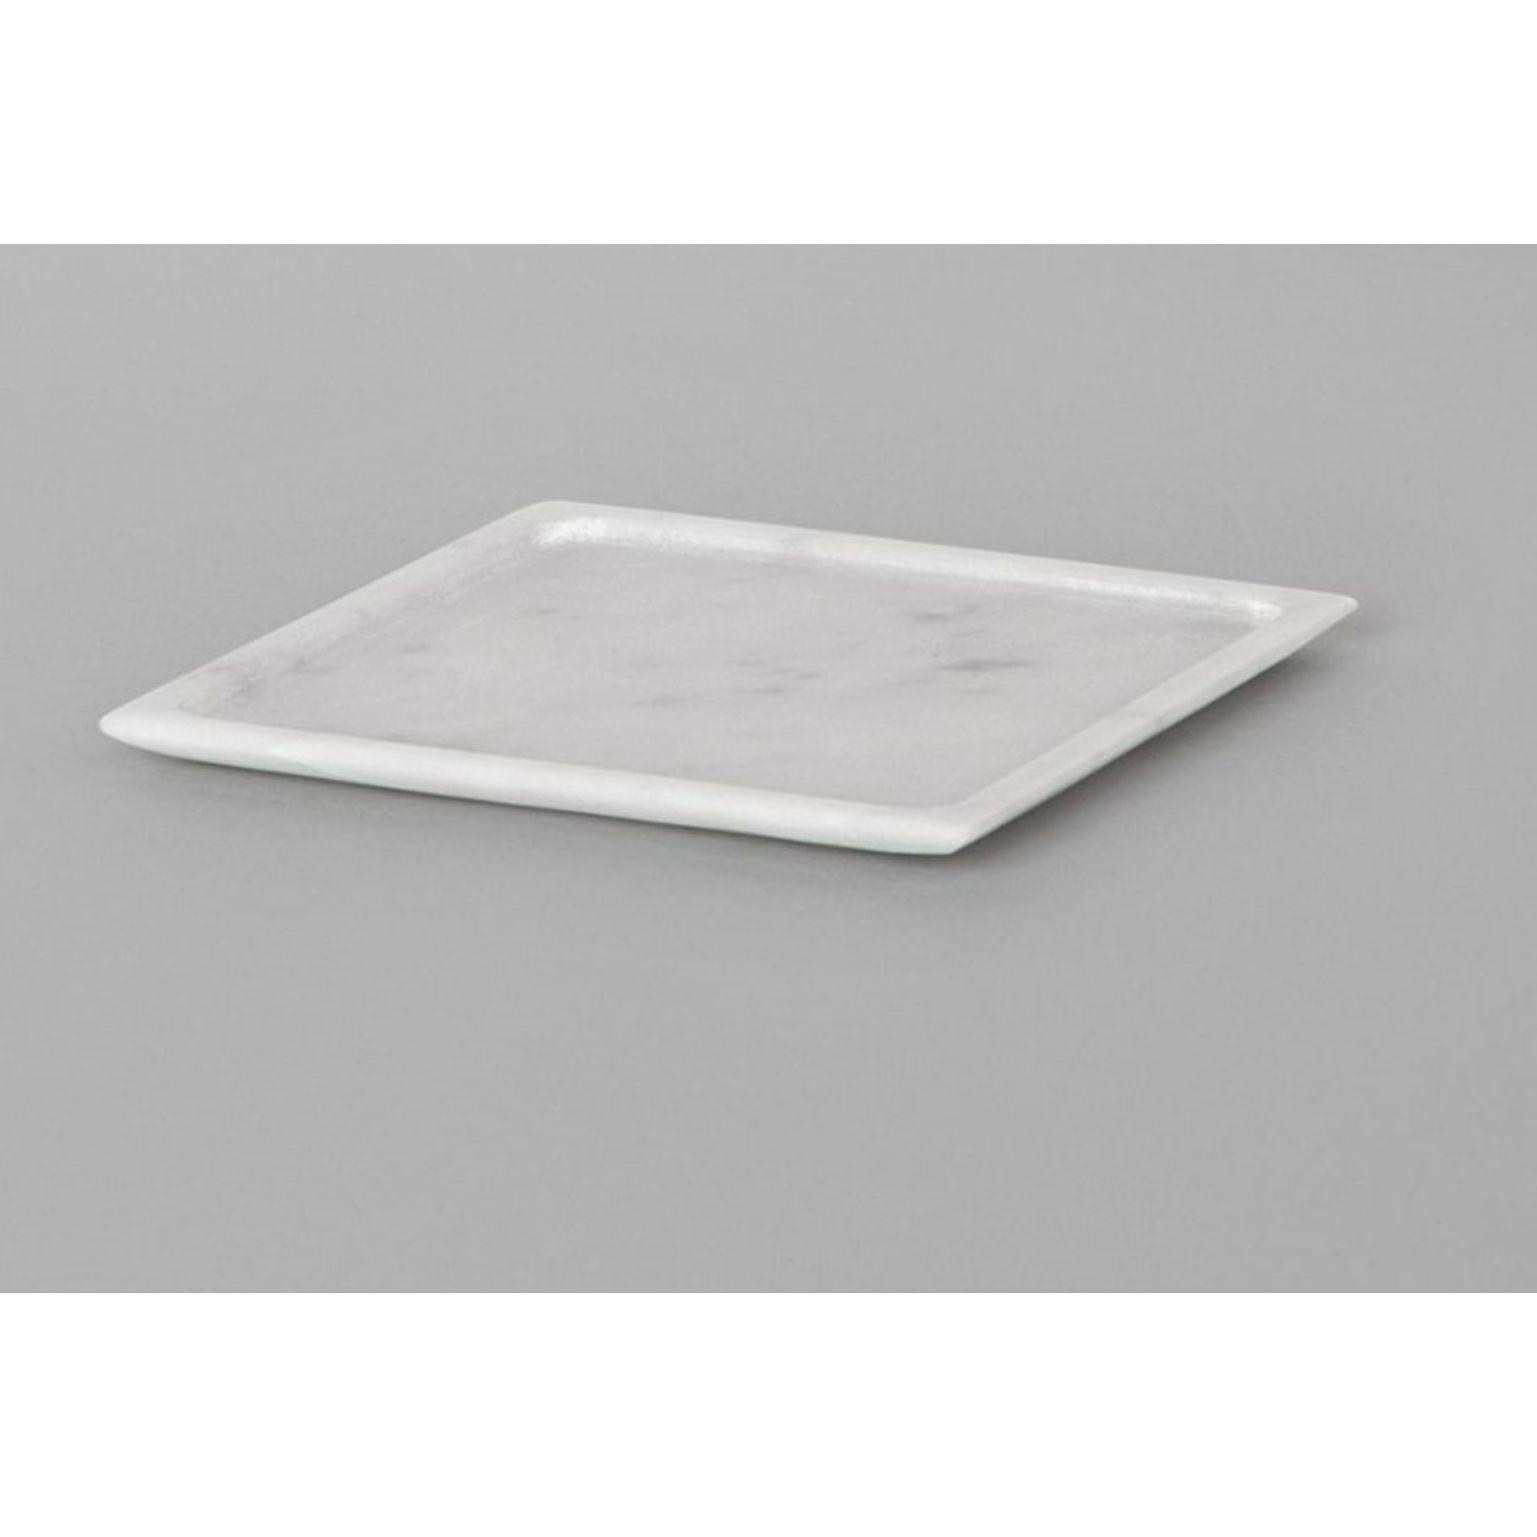 Square Piccolo plate by Studioformart
Total Marble Collection
Dimensions: 15 x 15 x 1 cm
Materials: Bianco carrara

The history of marble carving is lost in time; in one breath, it takes us back to the IV century BC, to ancient Greece where